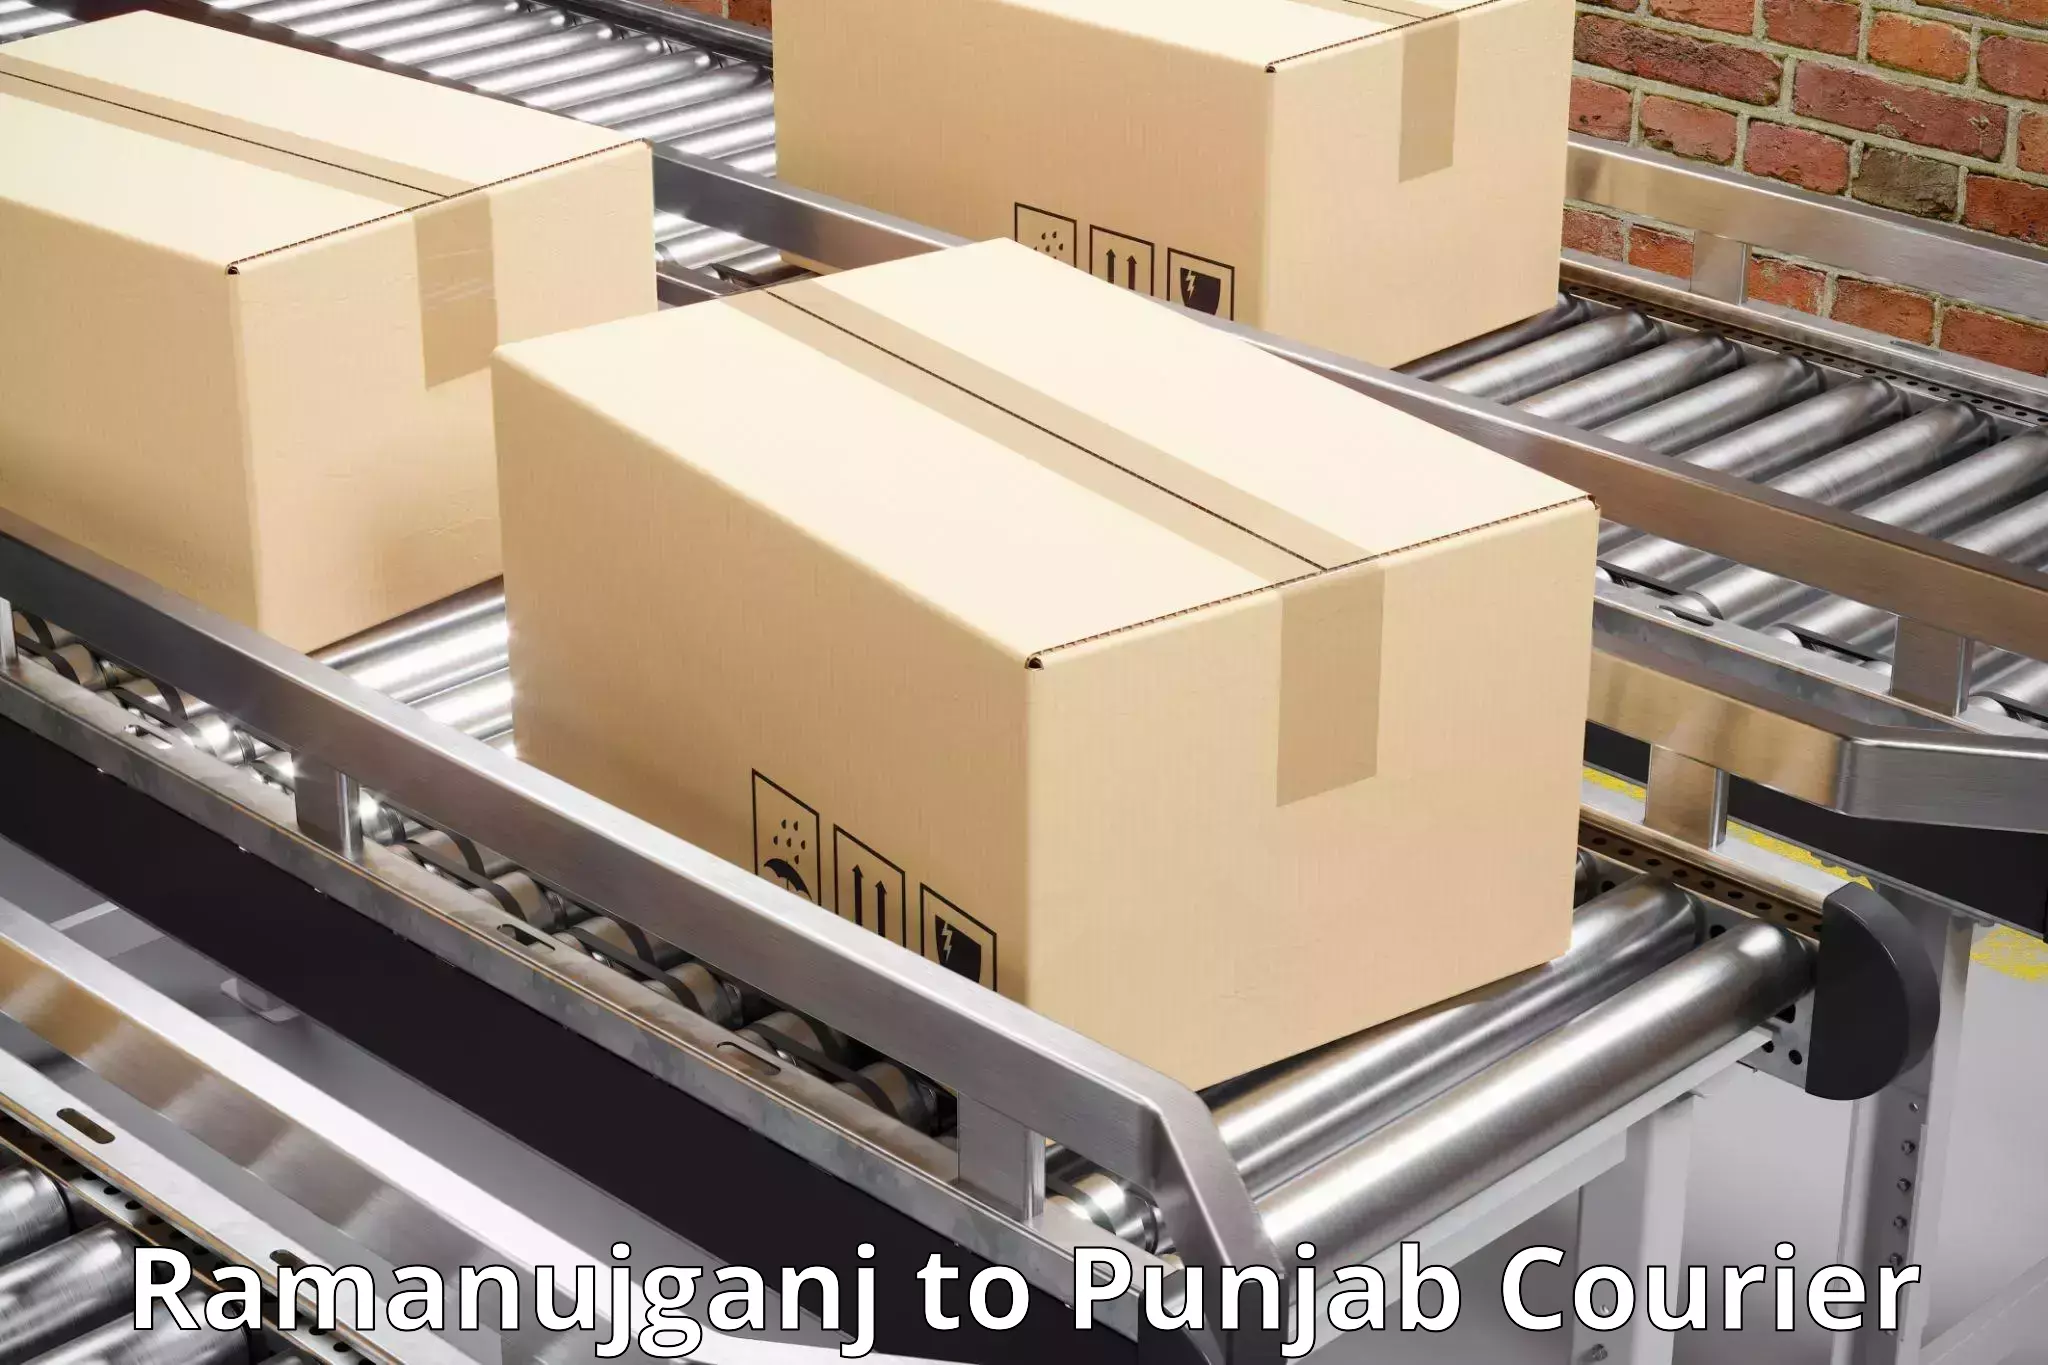 Automated parcel services Ramanujganj to Mohali